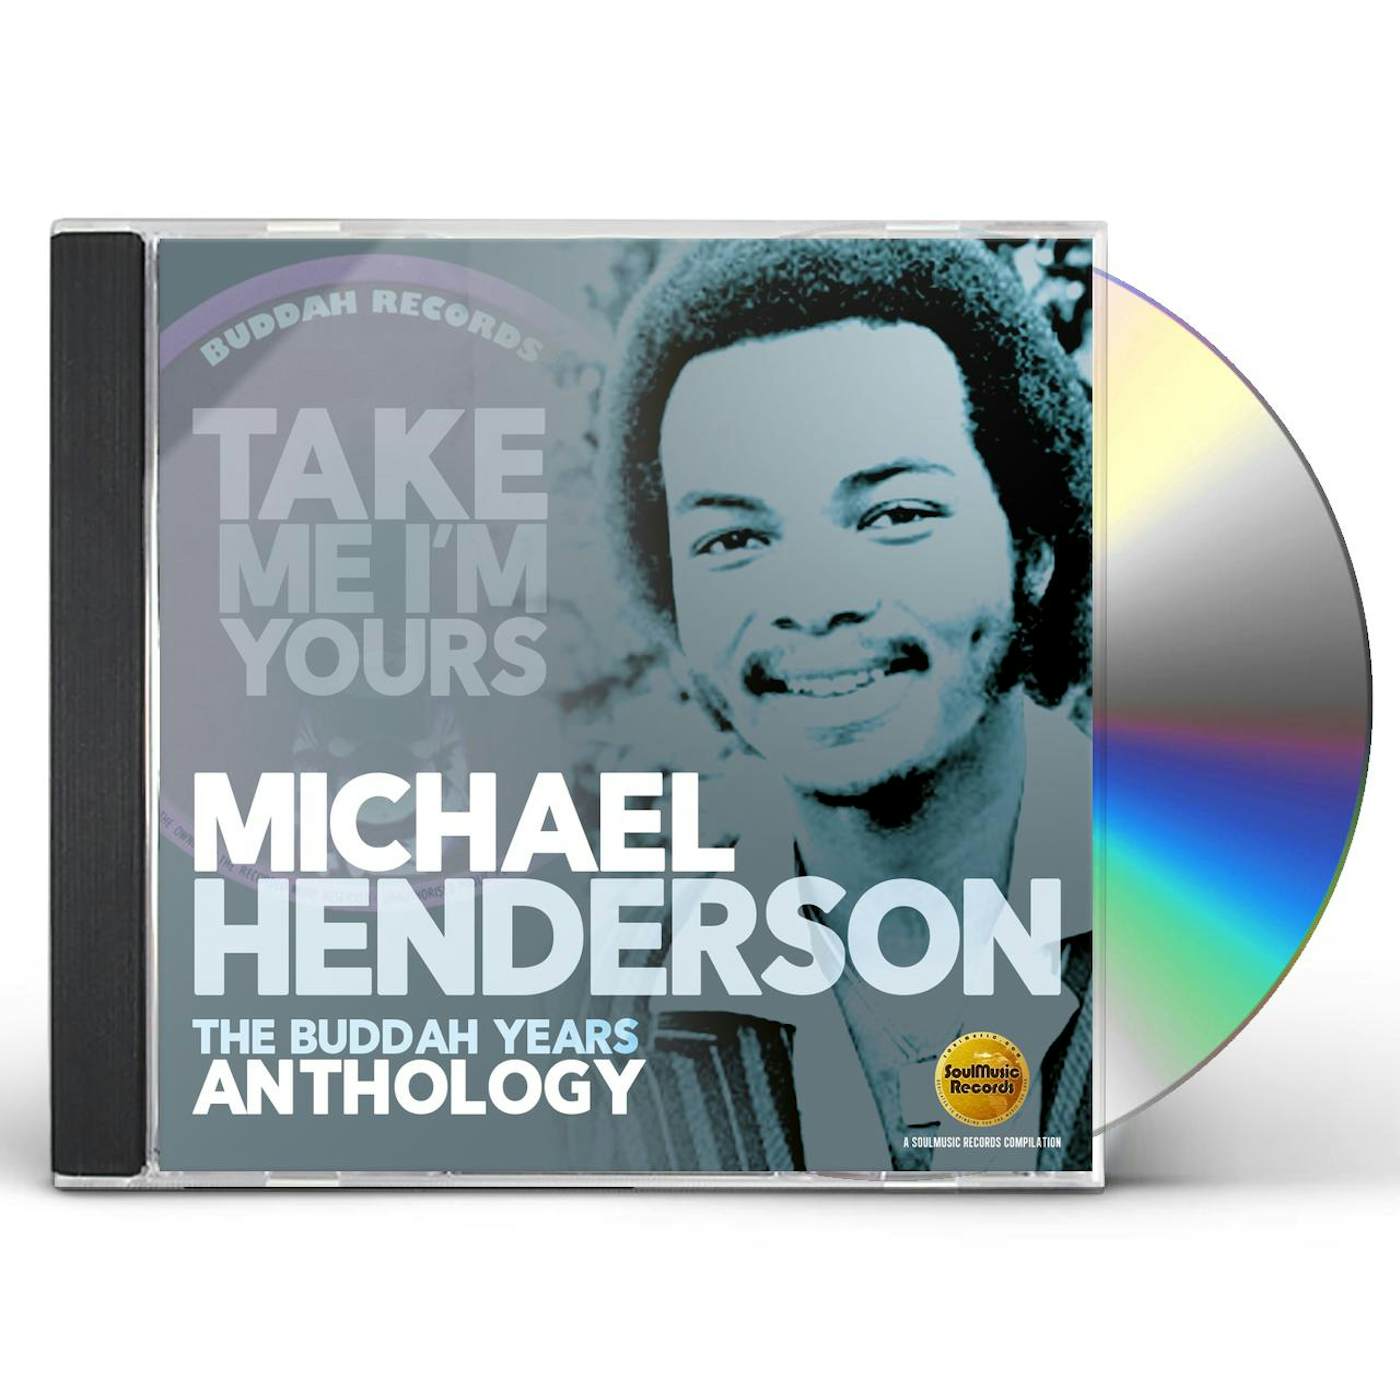 Michael Henderson TAKE ME I'M YOURS: THE BUDDAH YEARS ANTHOLOGY CD